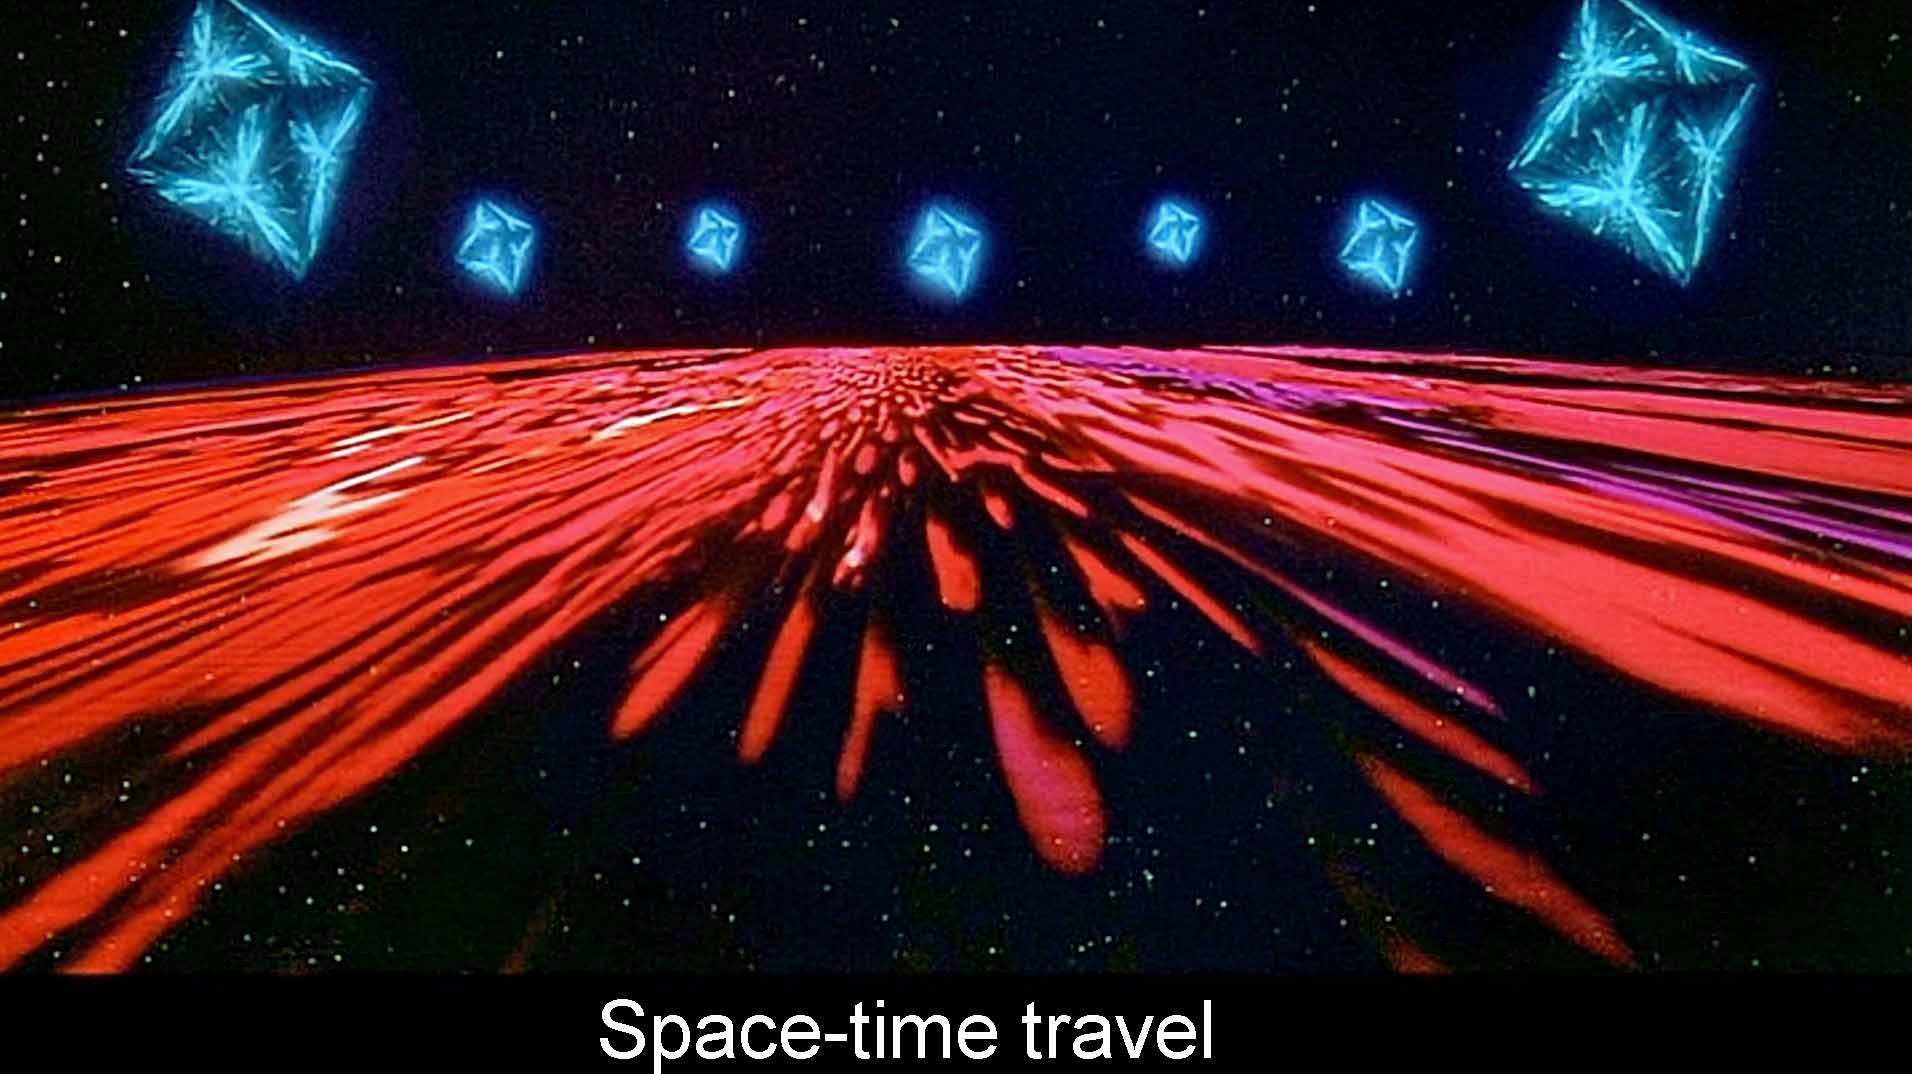 Space-time travel